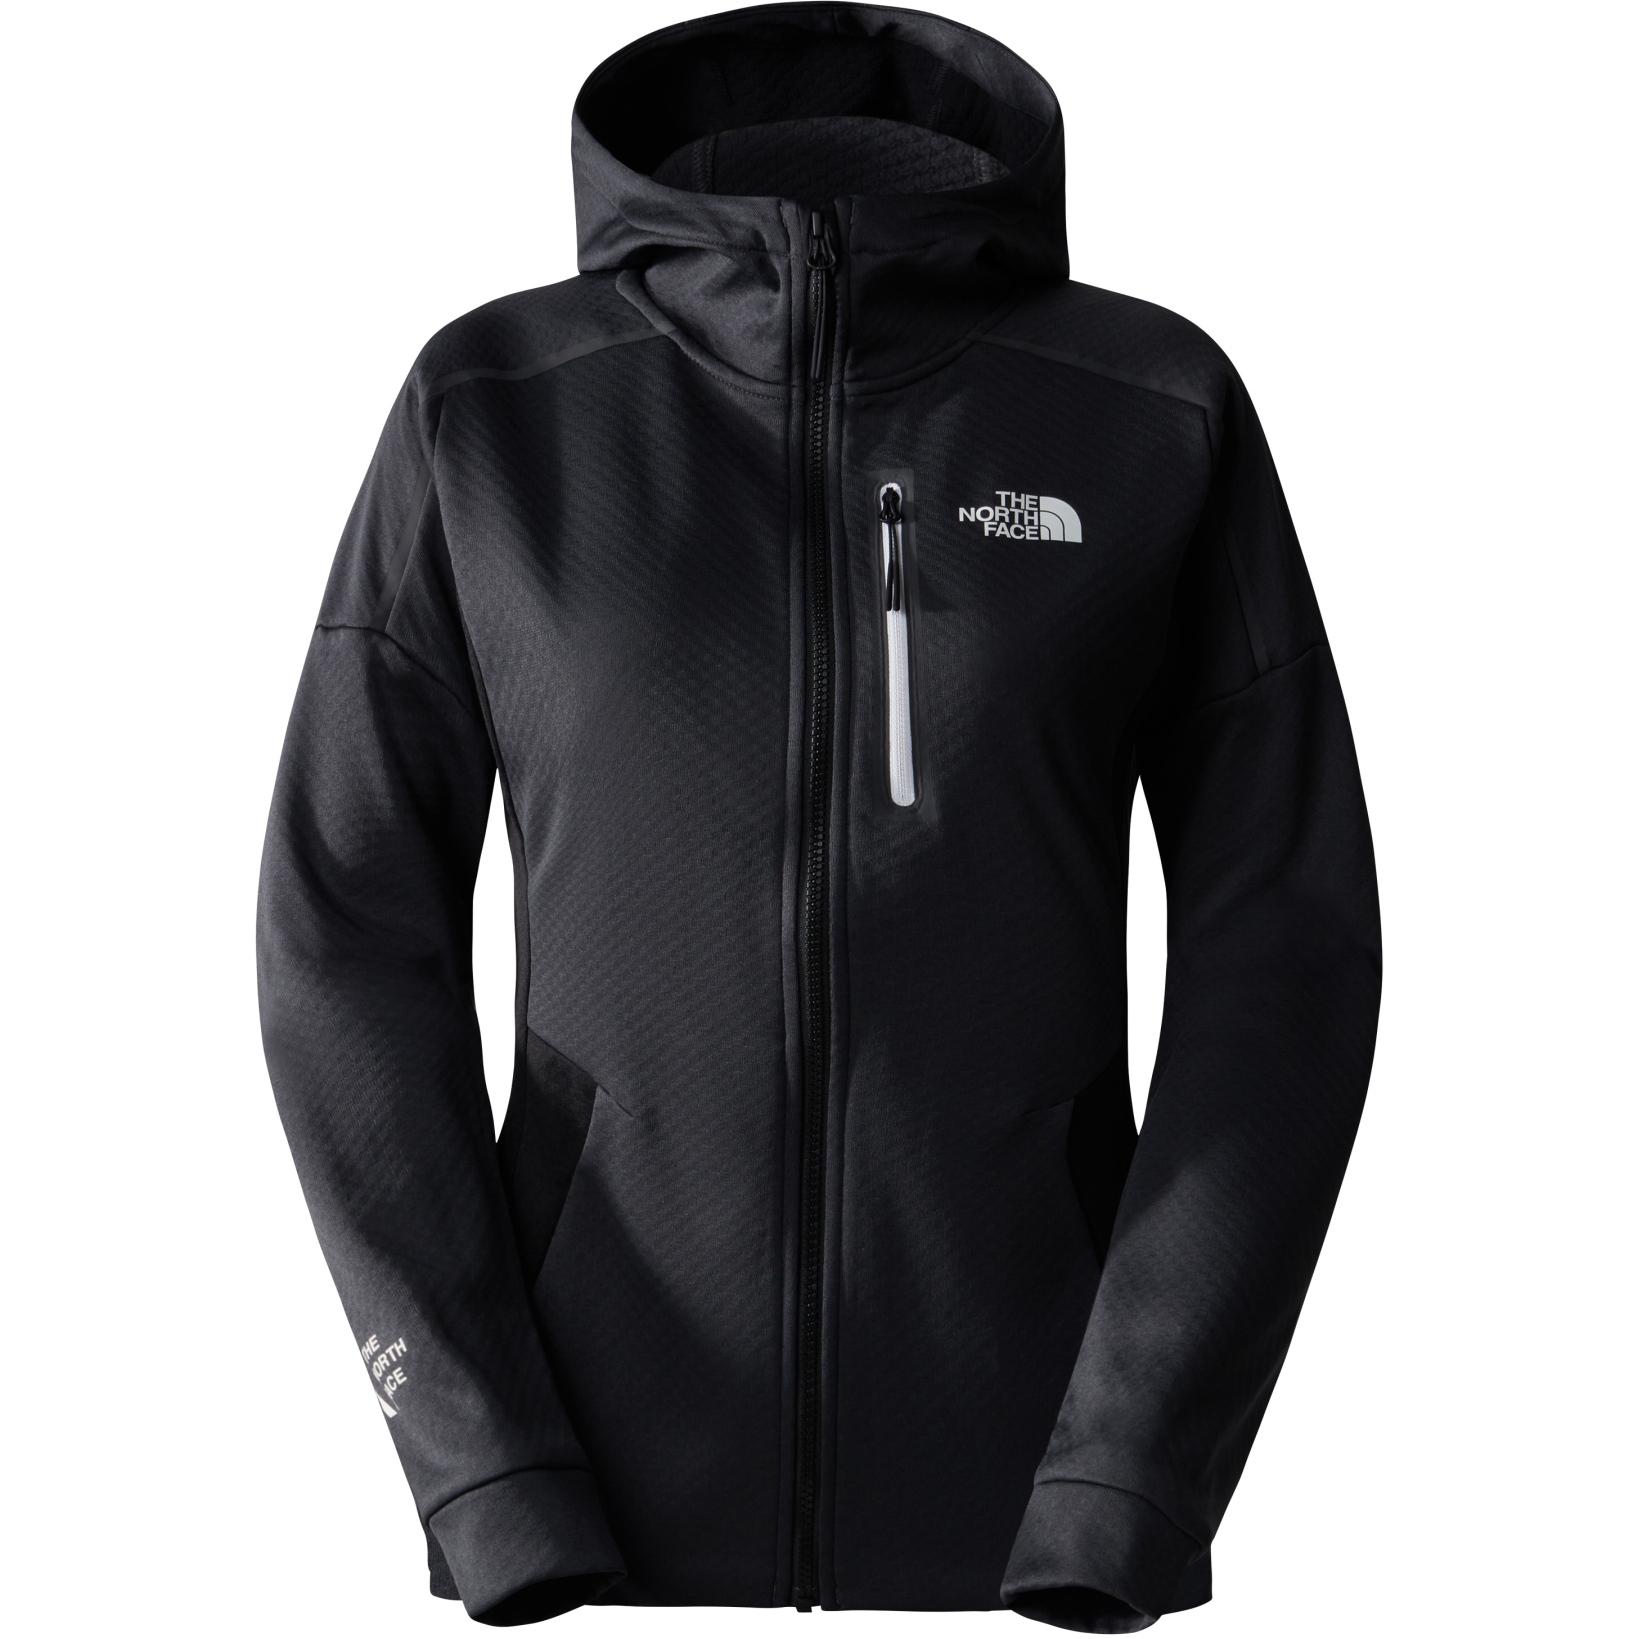 Picture of The North Face Mountain Athletics Lab Hoodie Women - Asphalt Grey/TNF Black